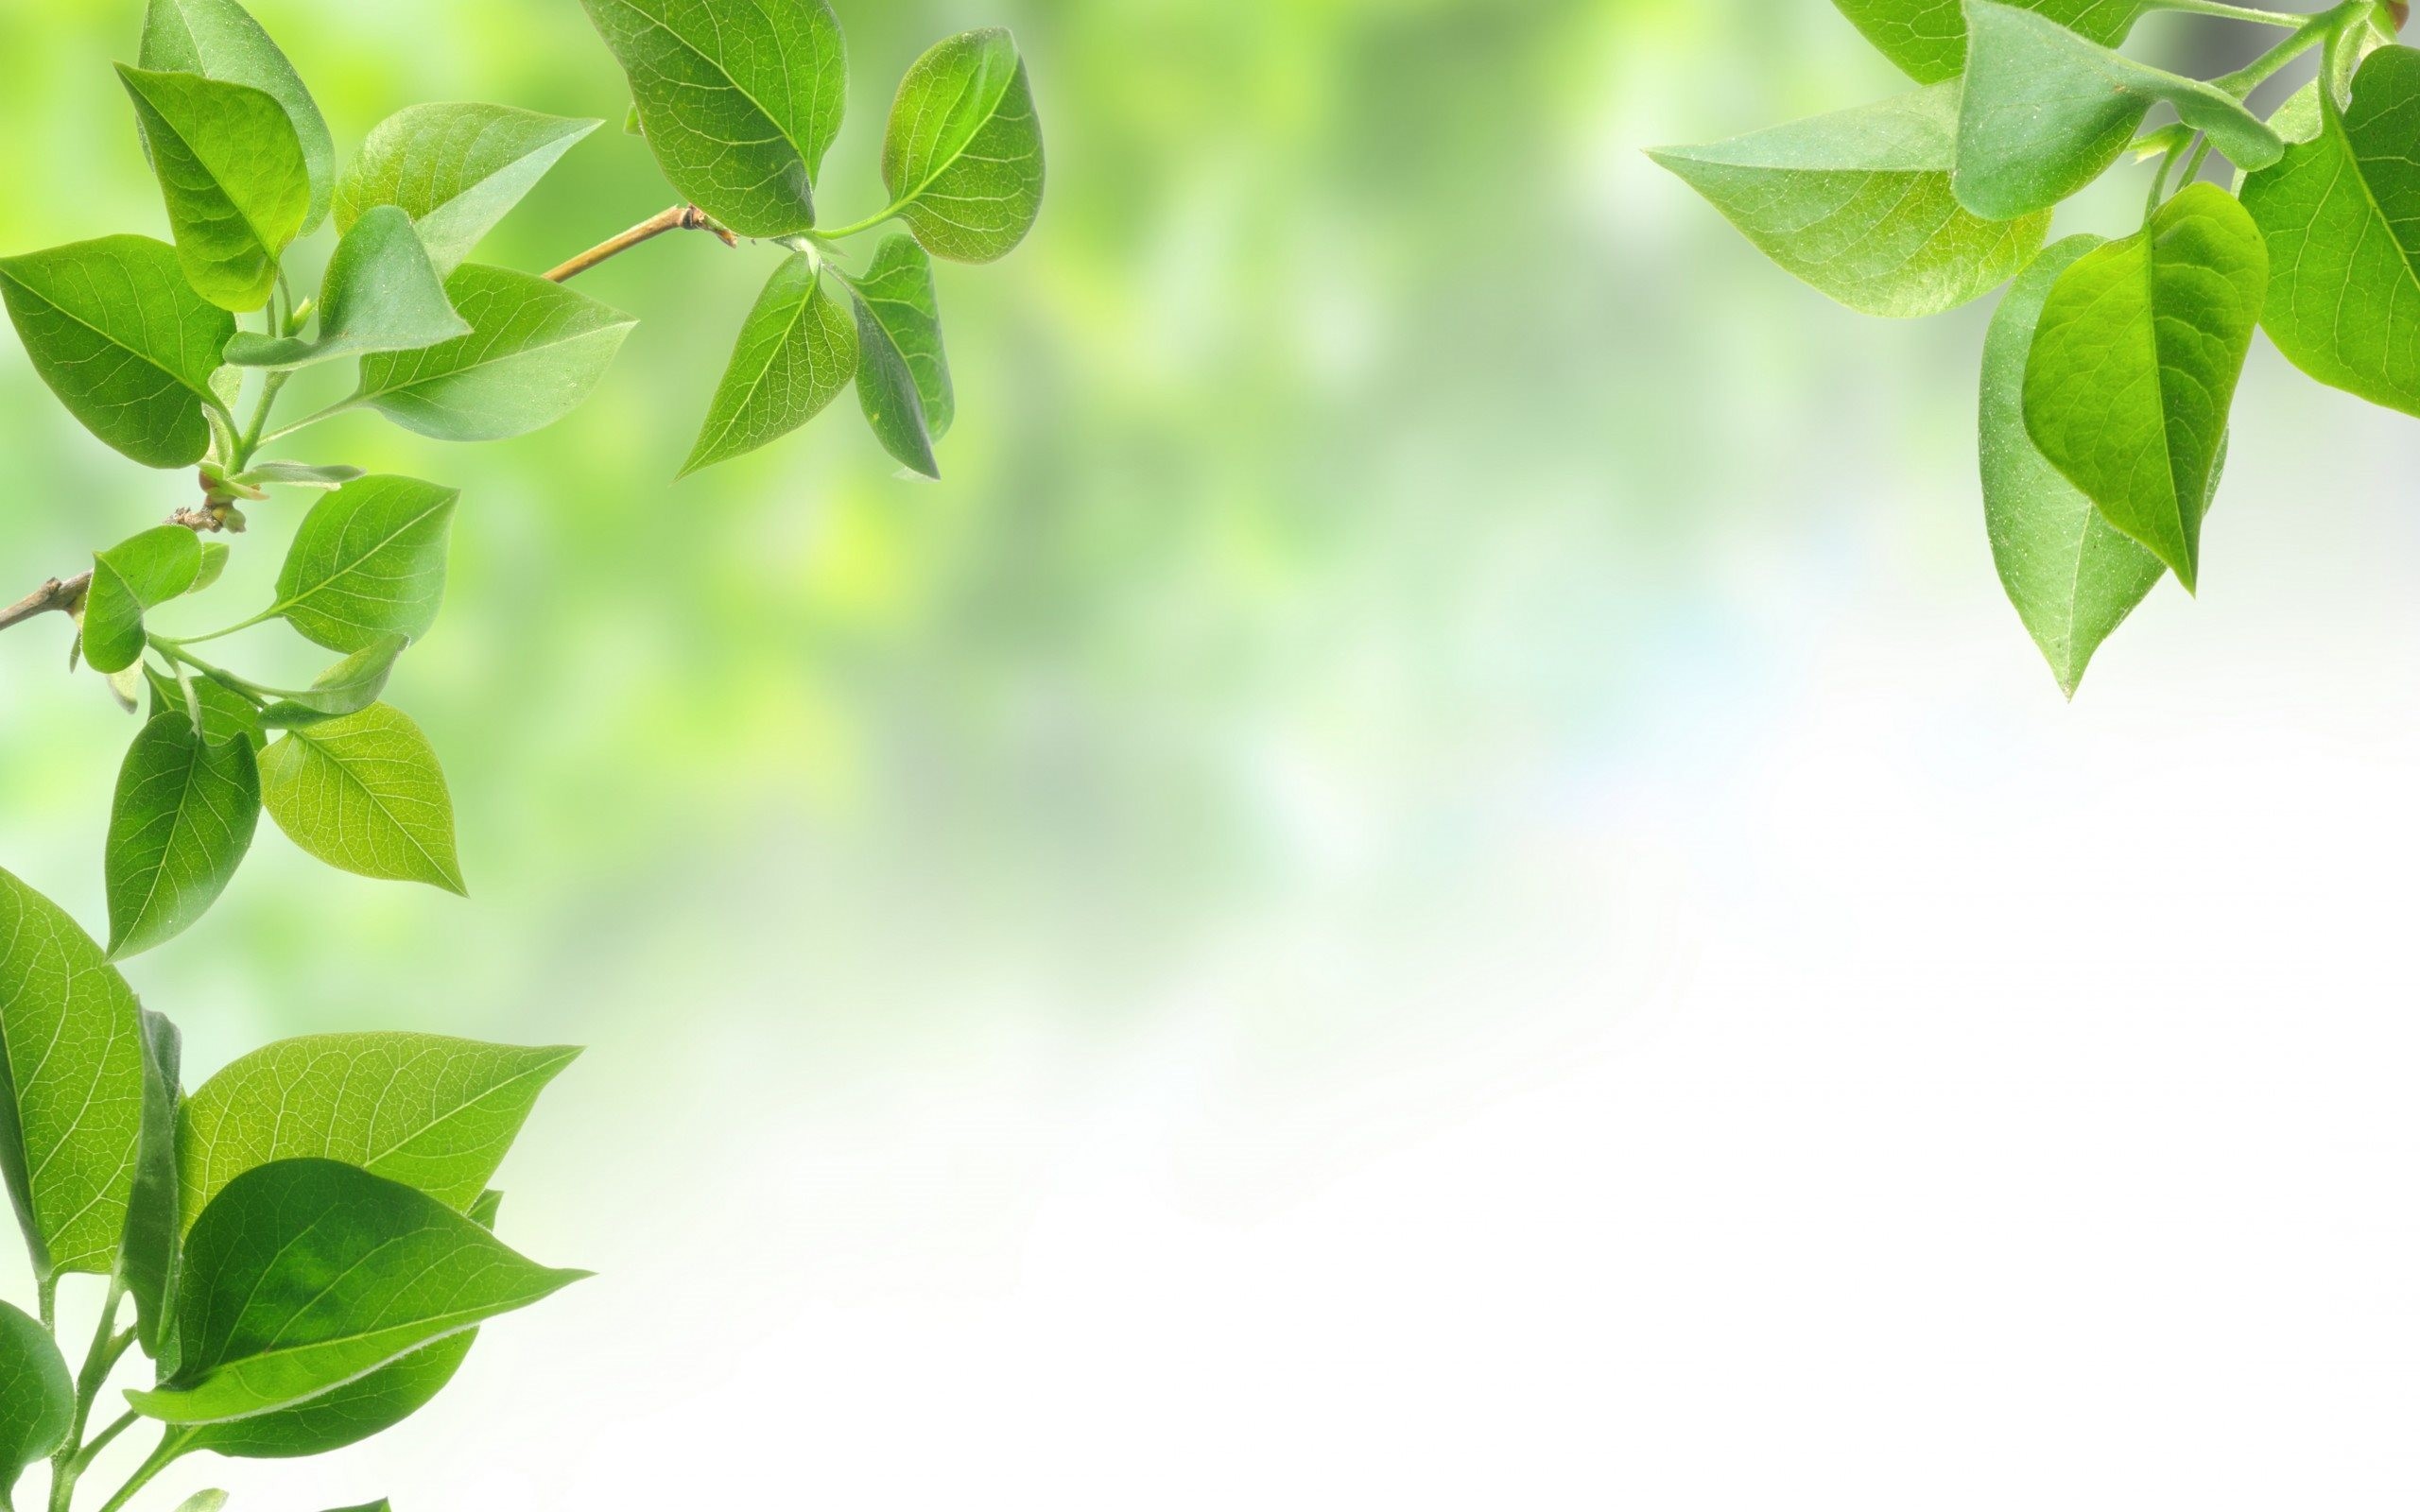 2560x1600 Green Leaves Wallpapers) – Free Backgrounds and Wallpapers